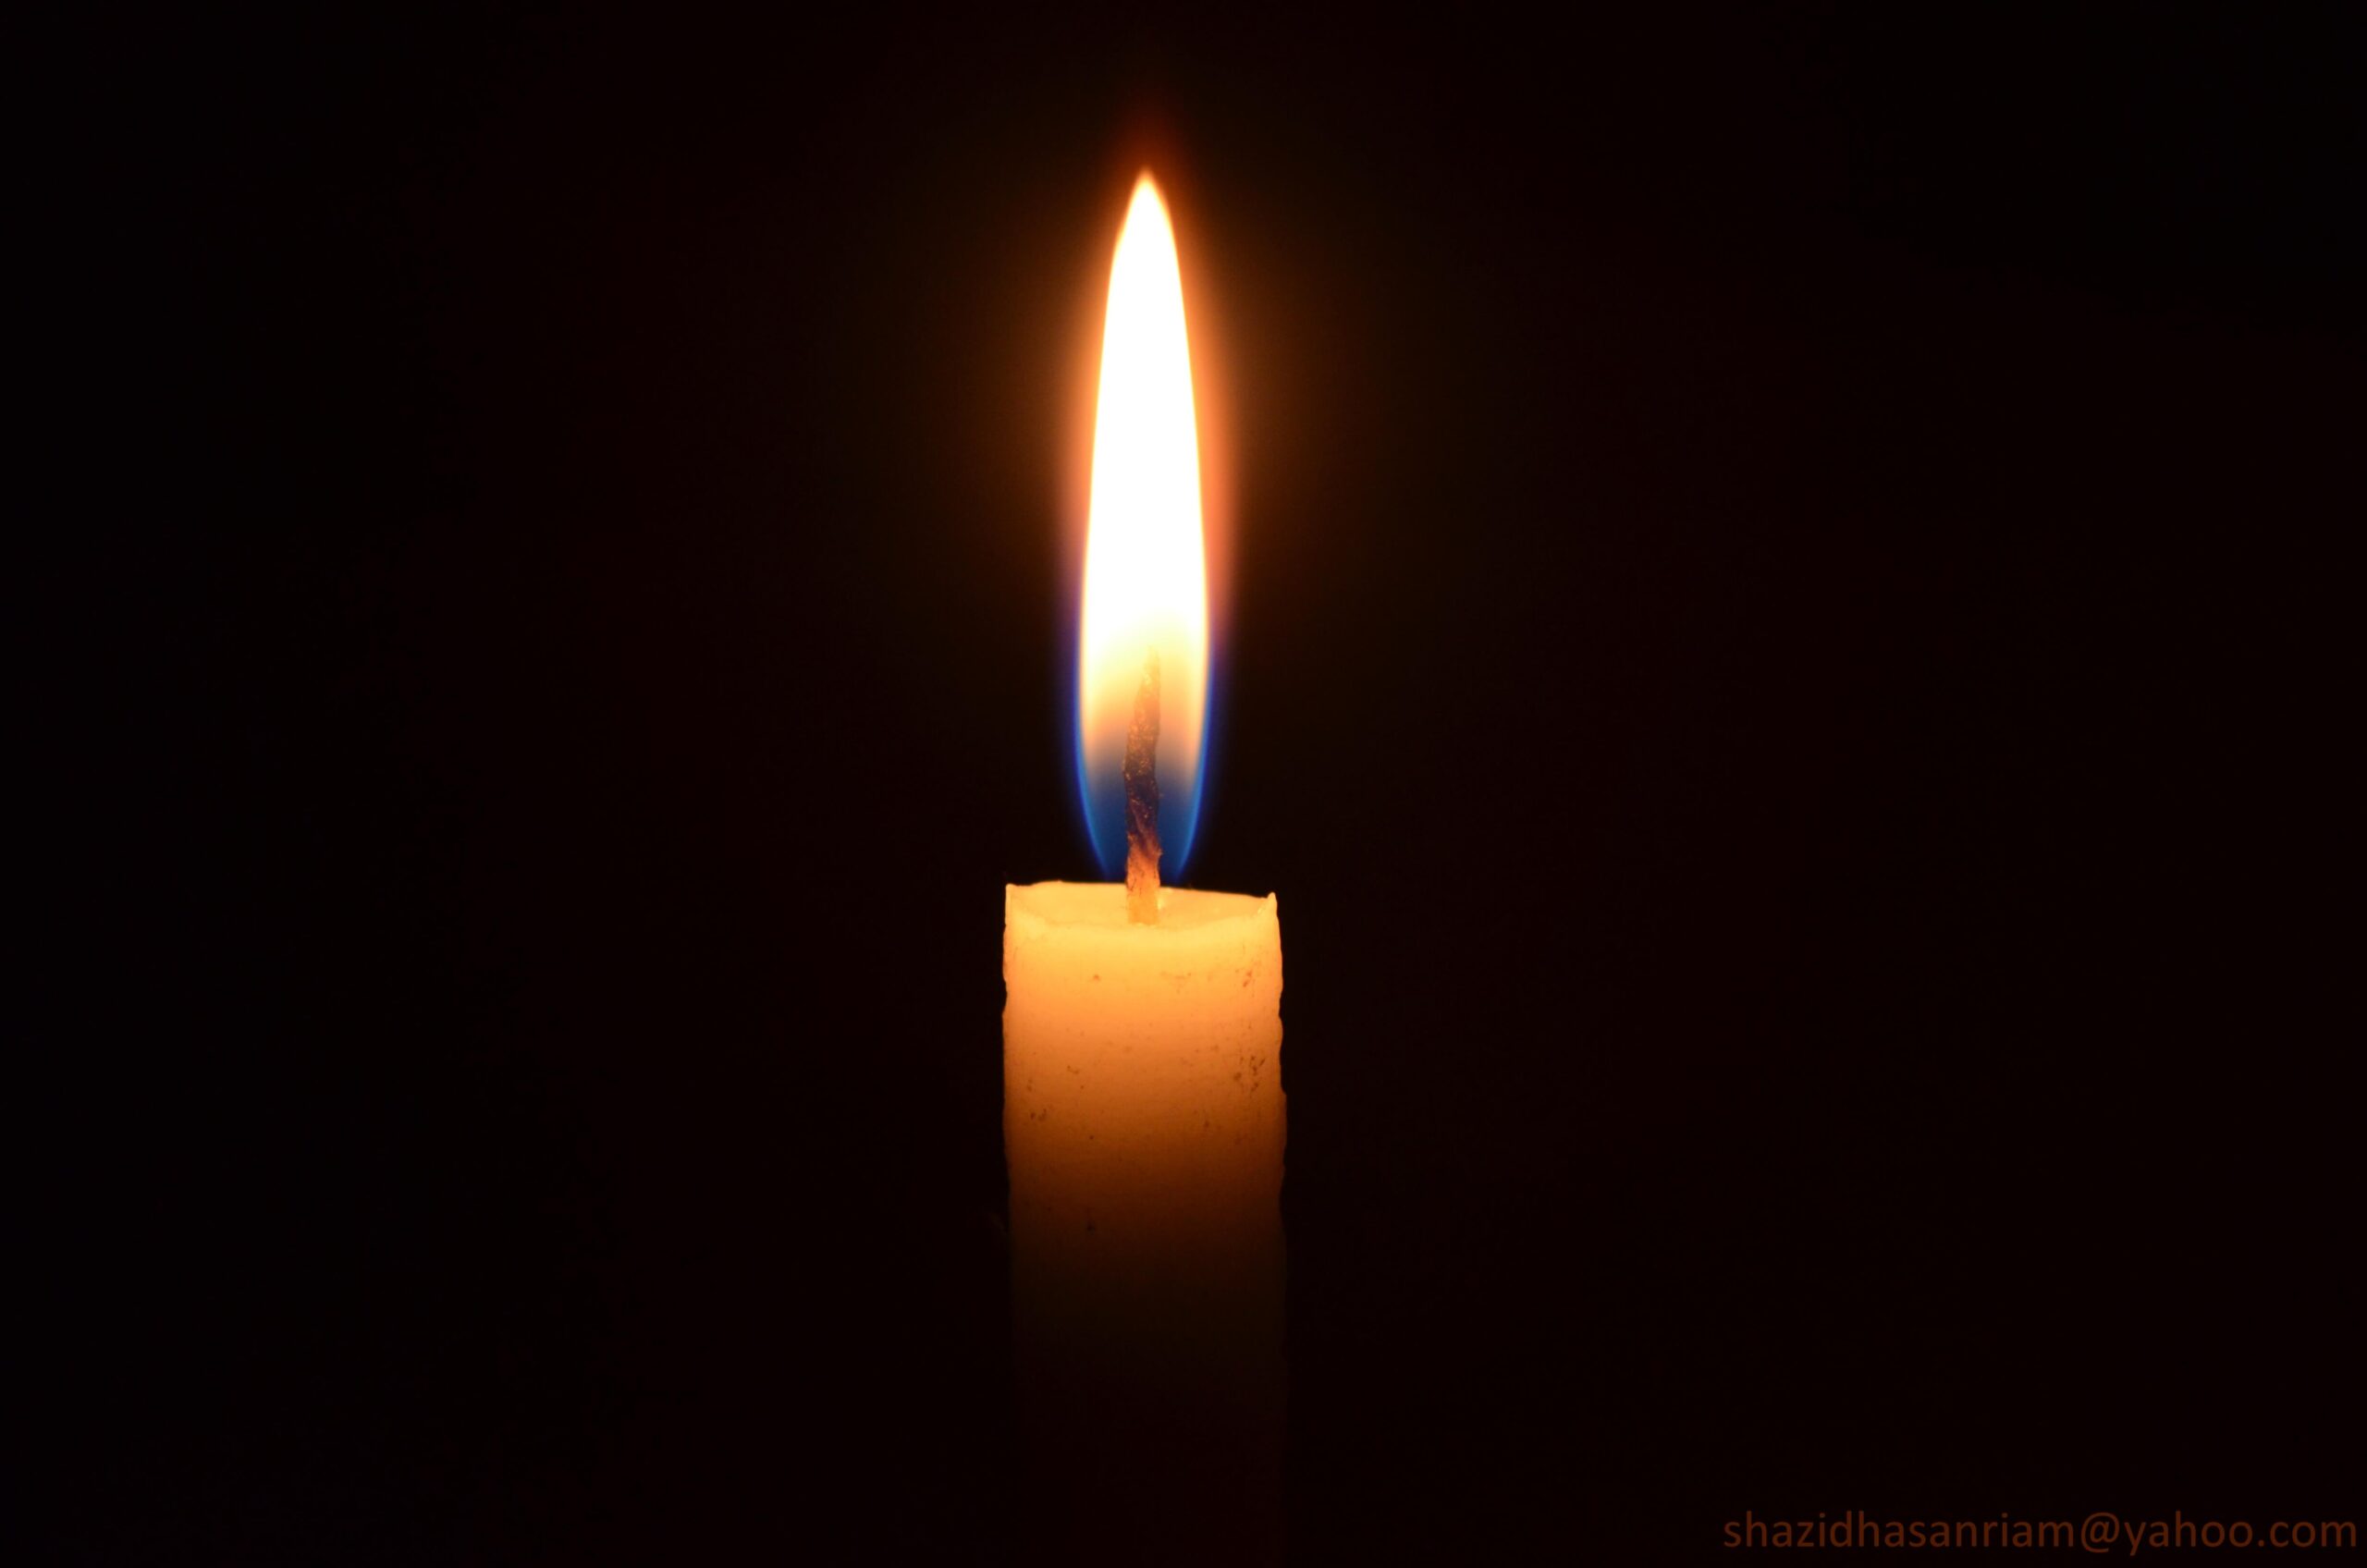 Featured image for “A Candle of Hope”